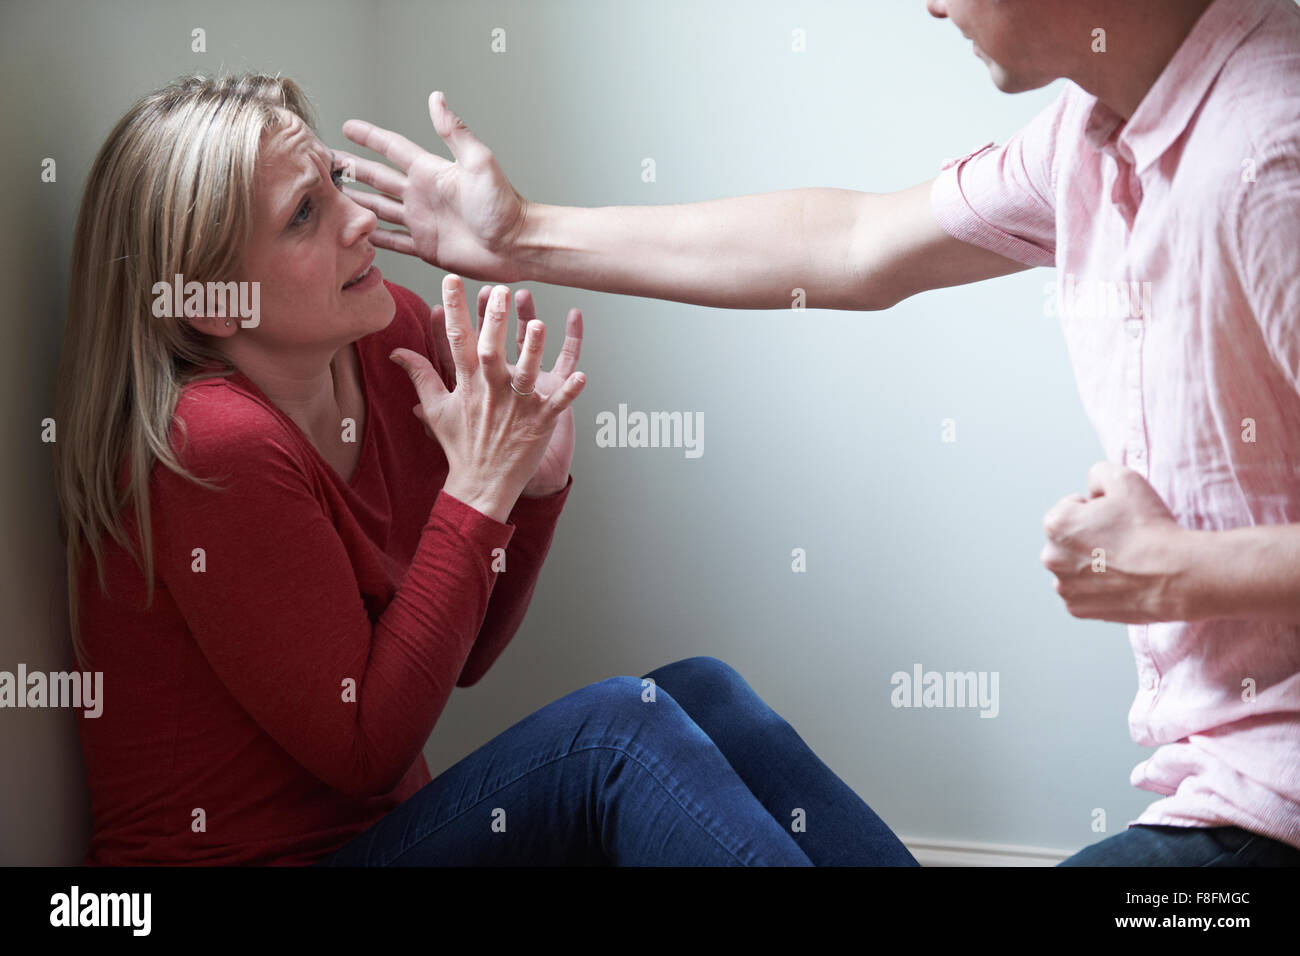 Man Being Physically Abusive Towards Female Partner Stock Photo